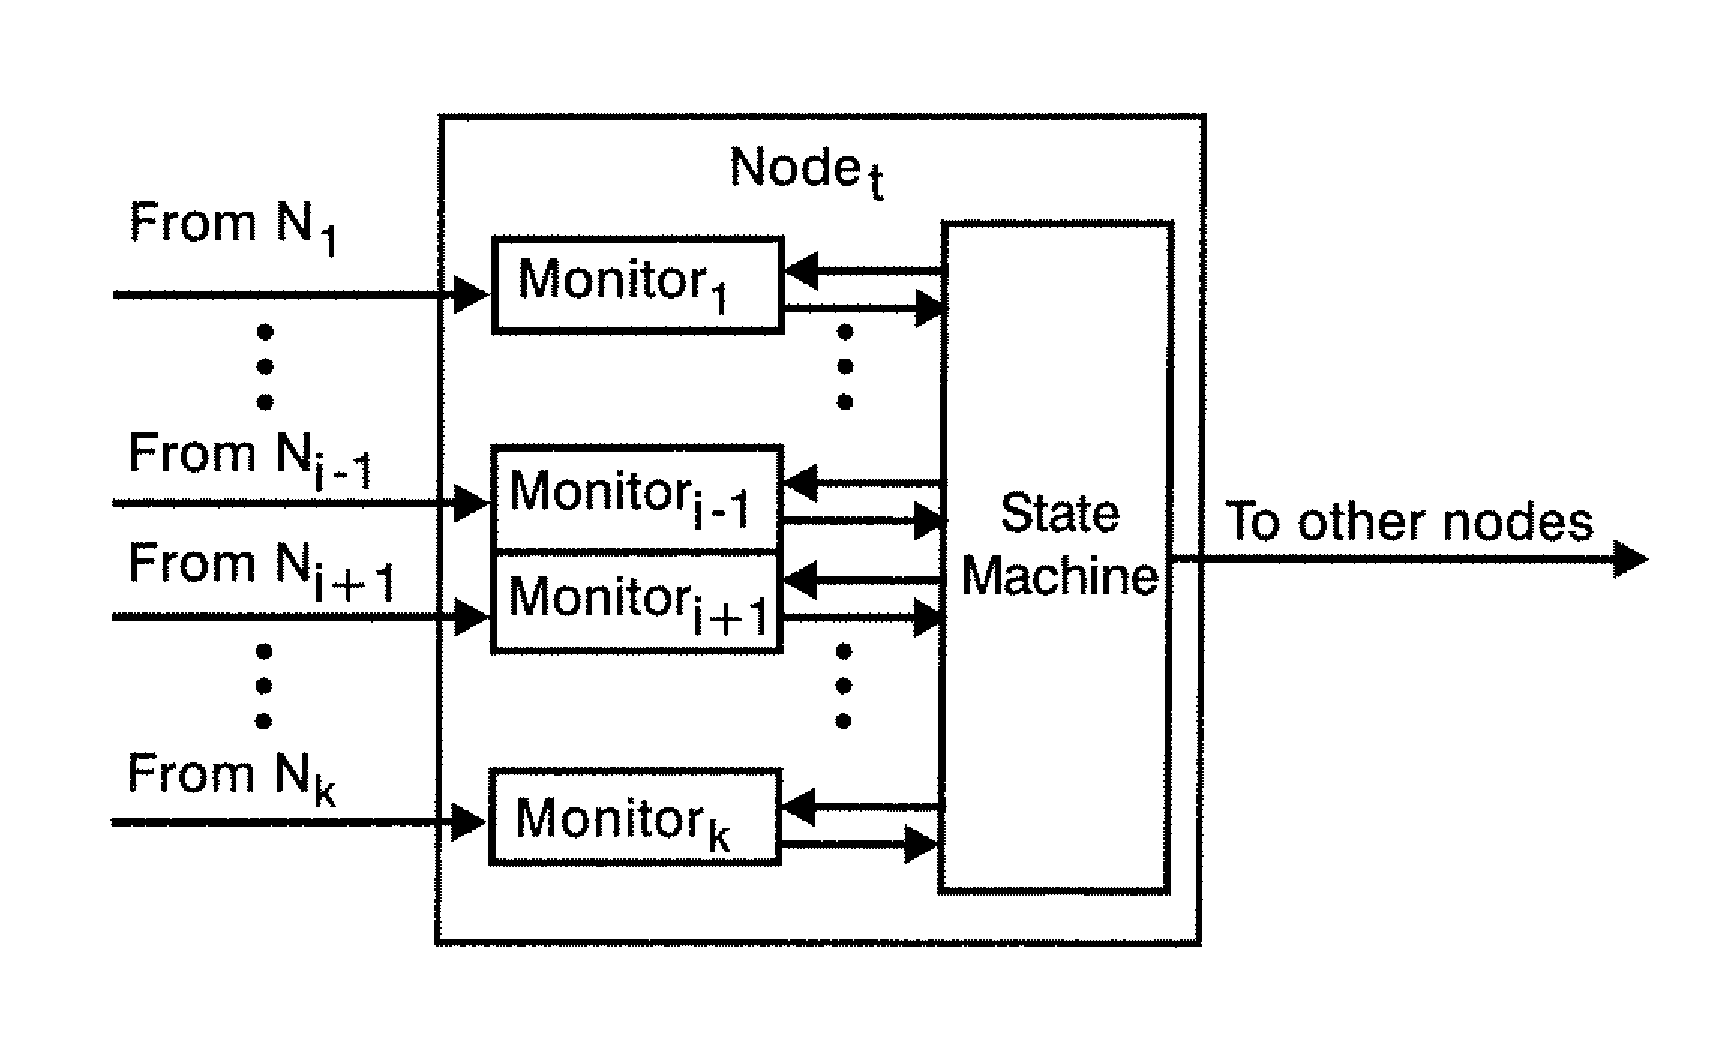 Byzantine-fault tolerant self-stabilizing protocol for distributed clock synchronization systems